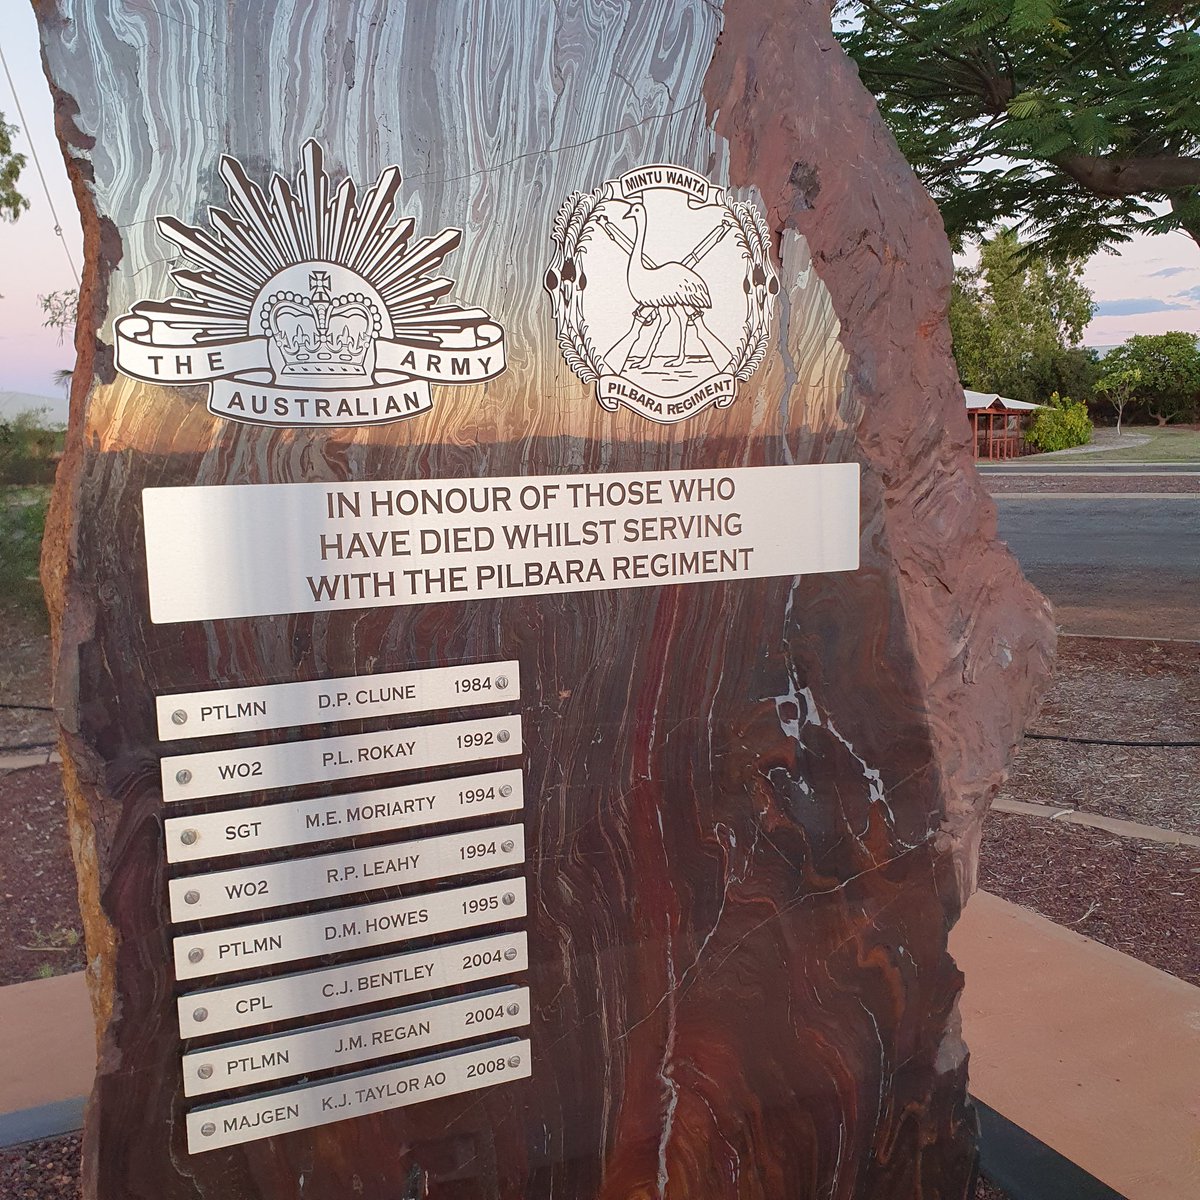 Behind the gates of the #Karratha #WesternAustralian🇦🇺 Headquarters of The @PilbaraRegiment, Taylor Barracks, stands the memorial rock to those who've died whilst a serving member of the Regiment.
One member, Patrolman James Regan, sadly perished during a cliff rescue in
1/